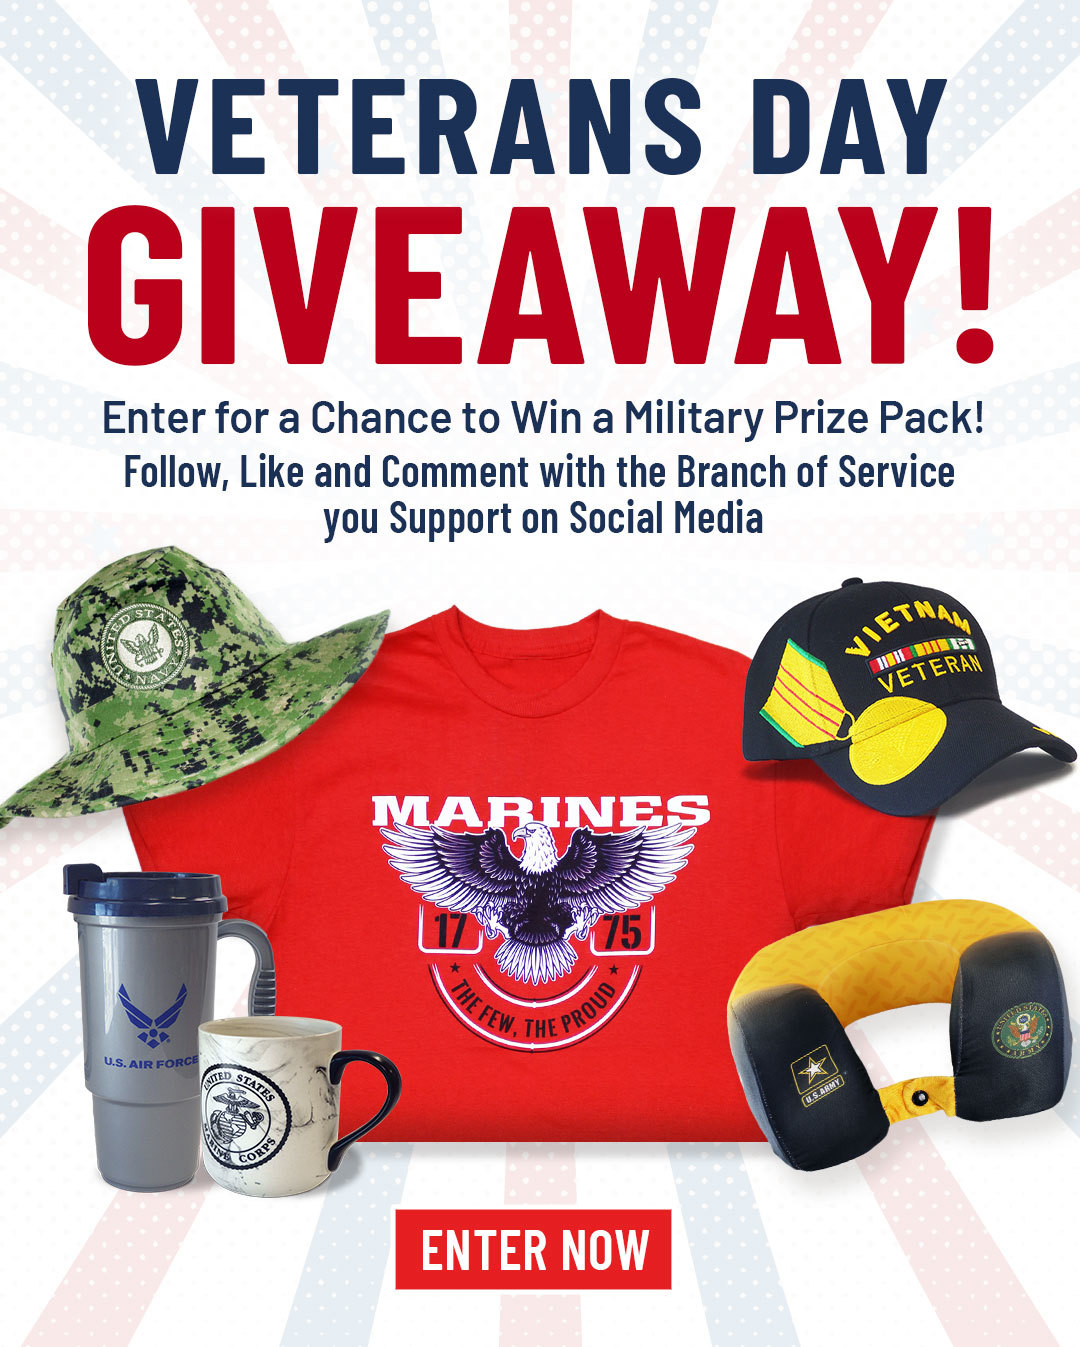 Veterans Day Giveaway!